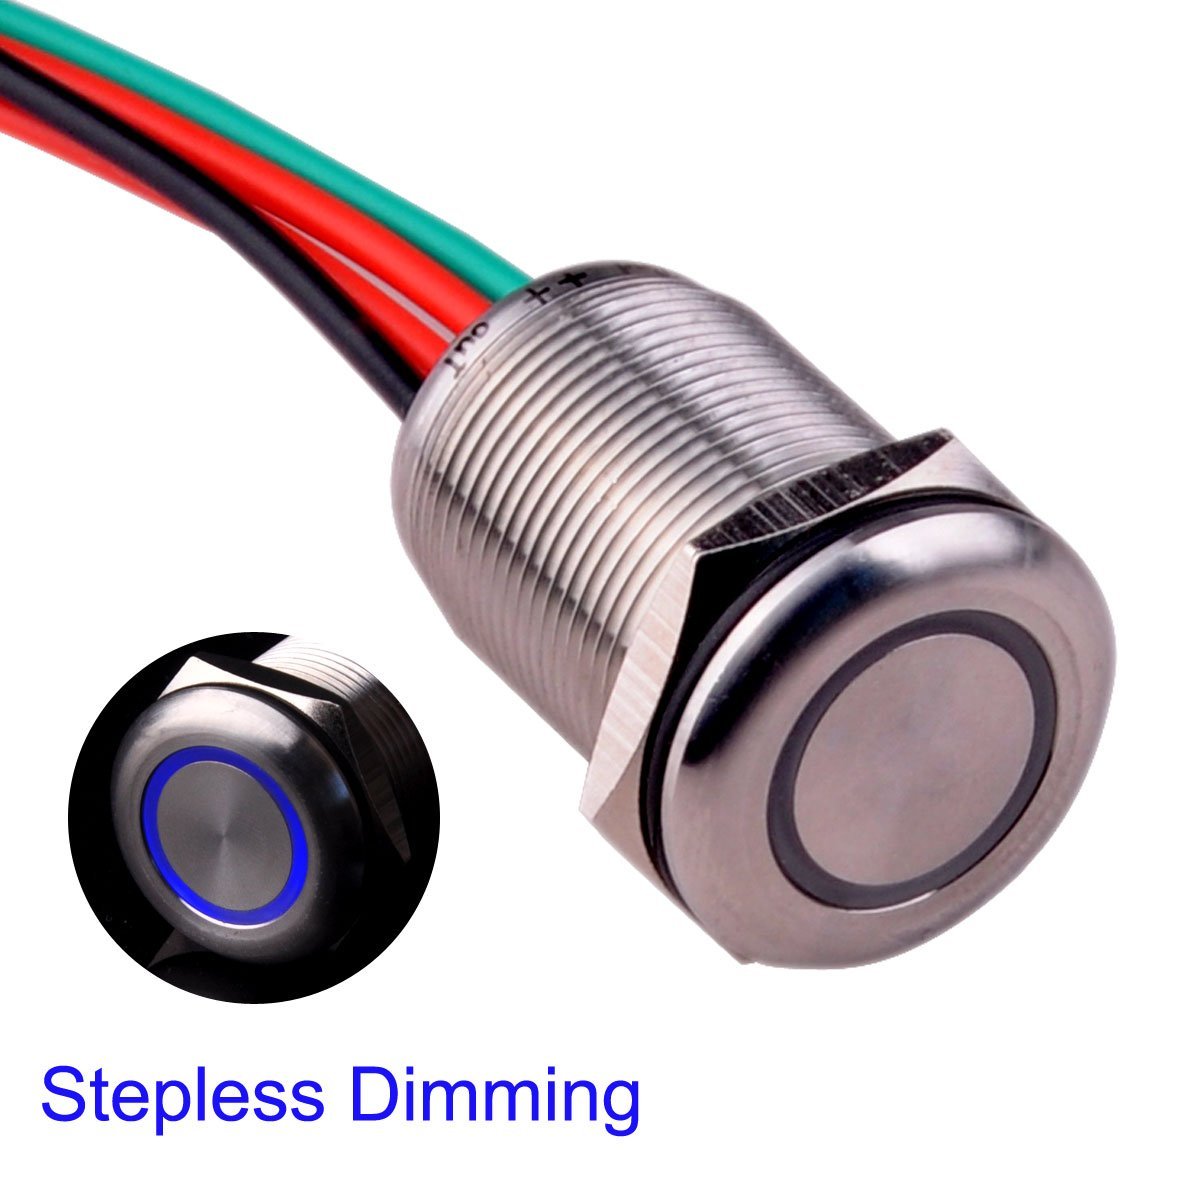 Ulincos Touch Switch UT19F2 Segmented Dimming Switch DC 6V to 24V Blue LED Suitable for 19mm 3/4 Mounting Hole Recessed